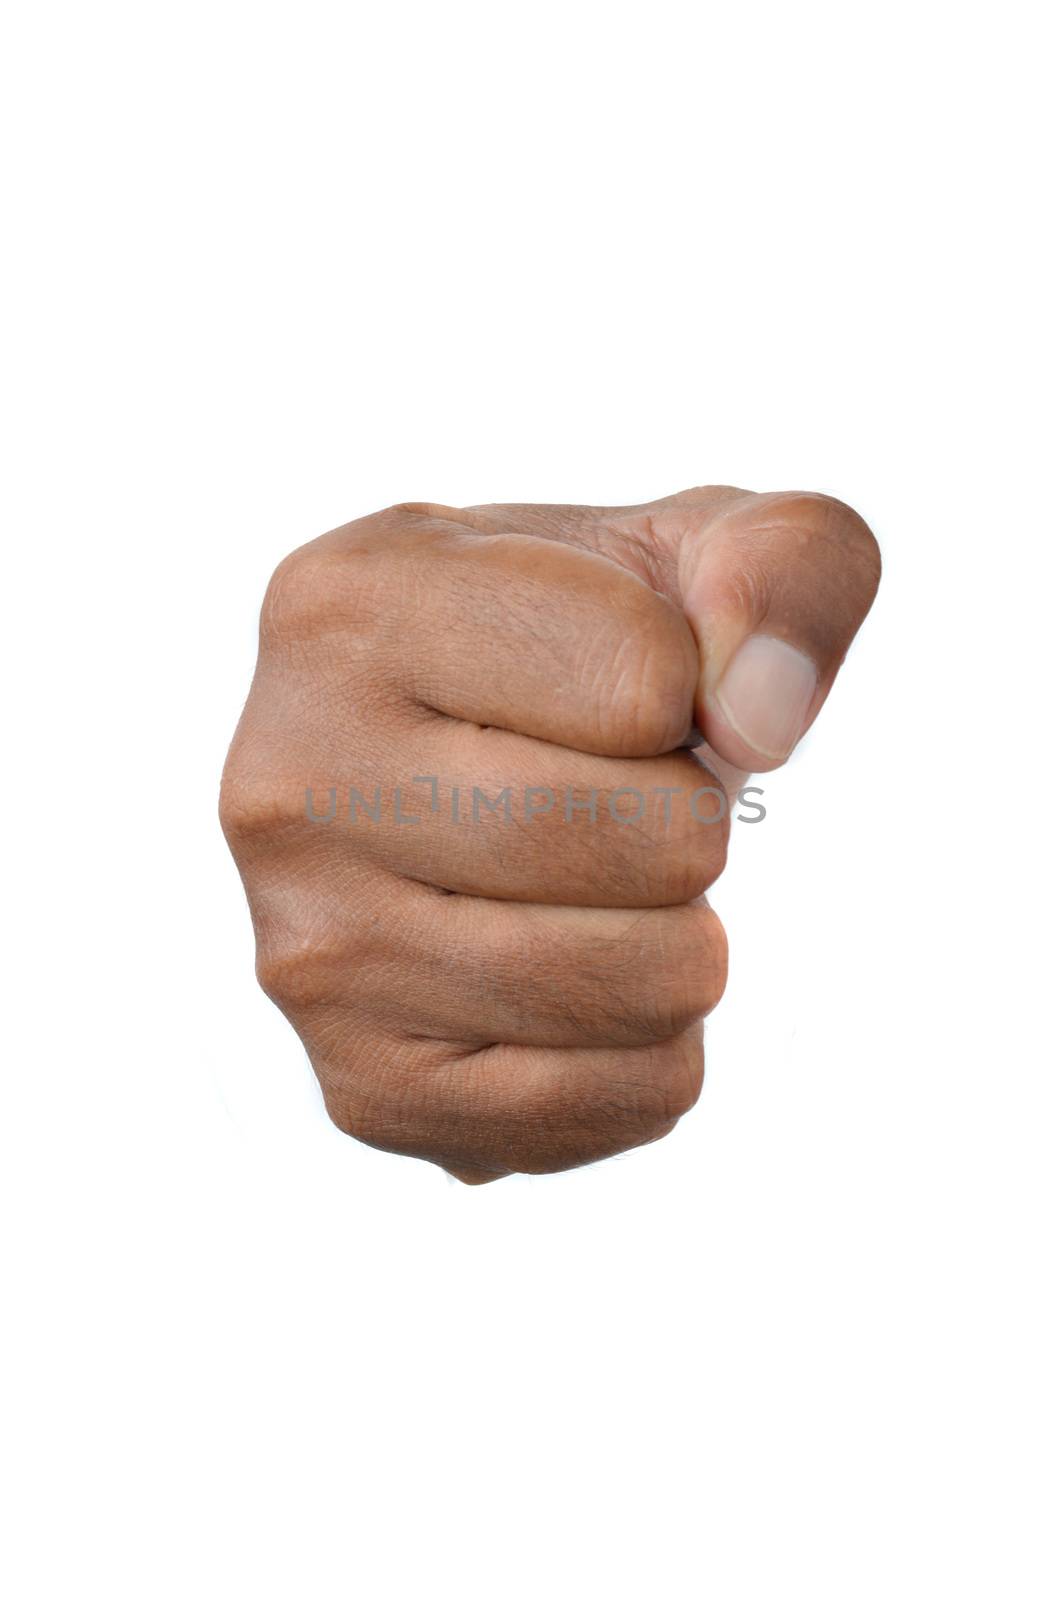 fist facing the front isolated on white background